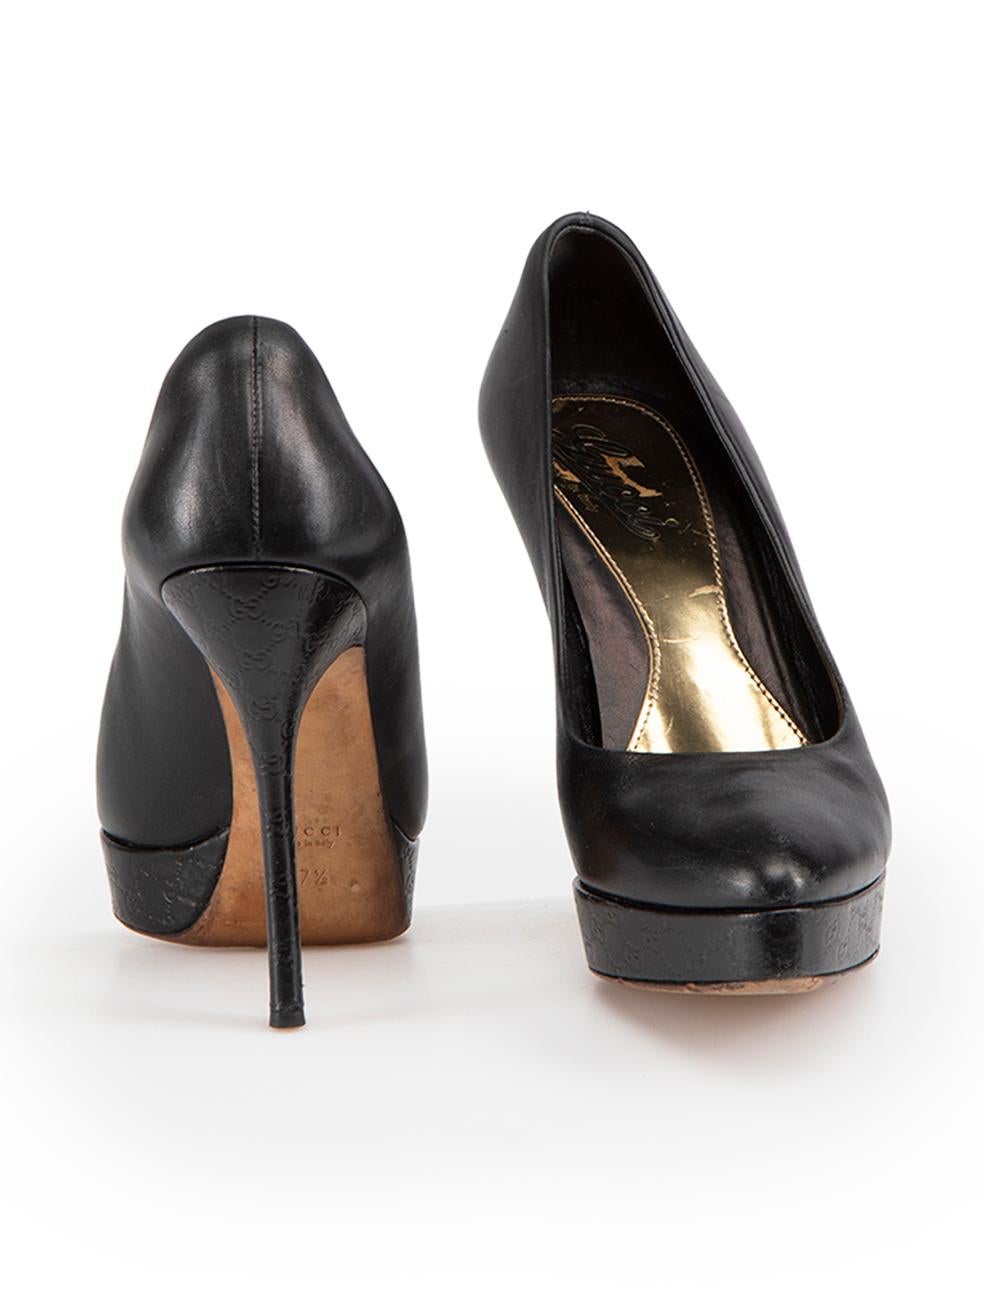 Gucci Black Leather GG Platform Pumps Size IT 37.5 In Good Condition For Sale In London, GB